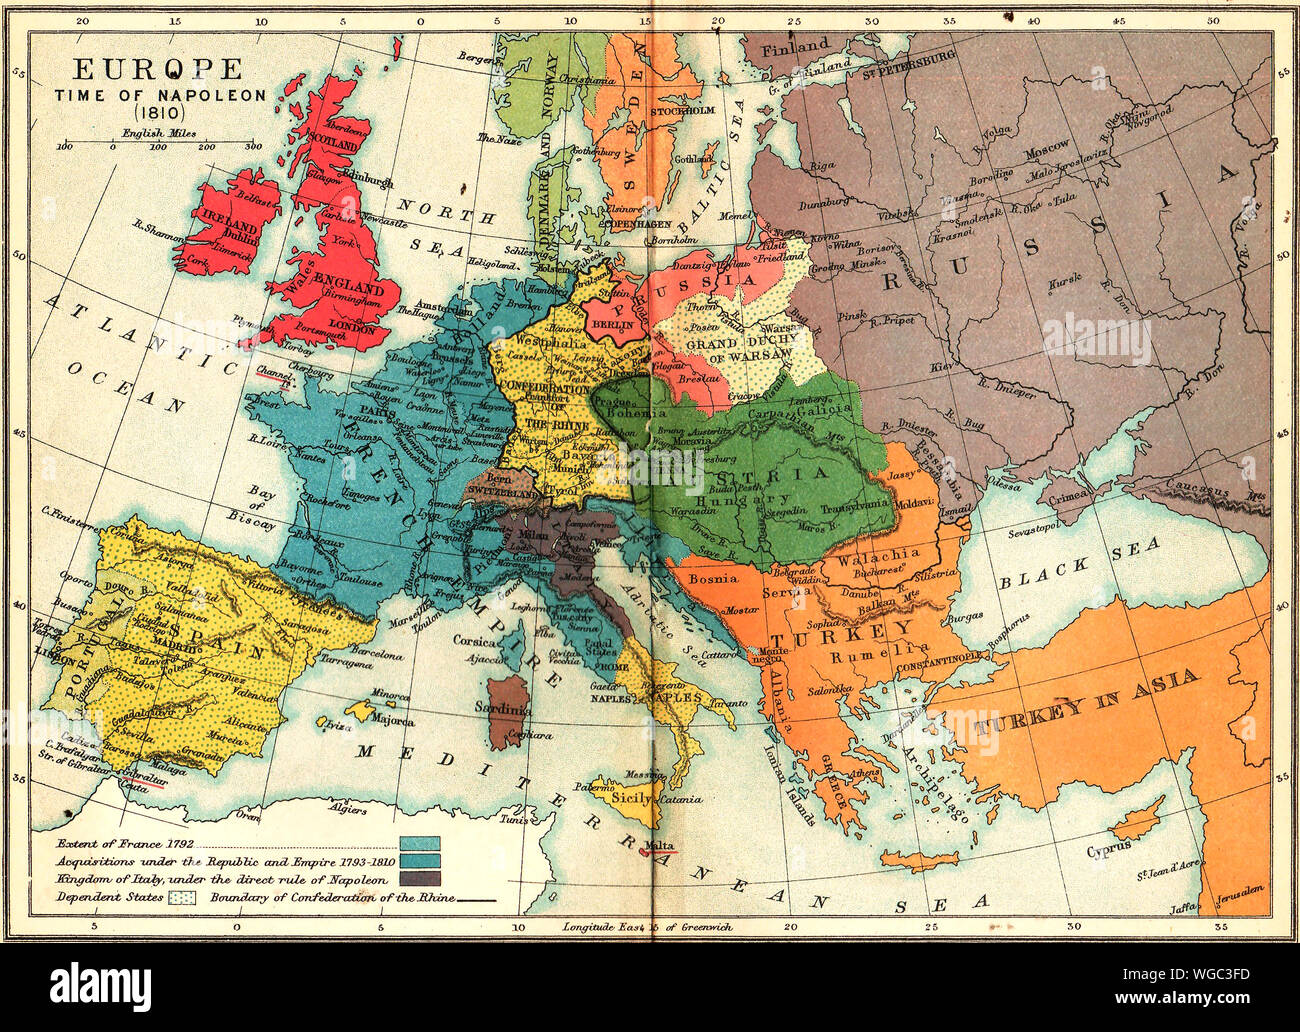 A 1910 map showing Europe at the time of Napoleon (1810) - Showing state of France in 1792 and its acquisitions up to 1810, Italy kingdom under rule of Napoleon,dependent states and  boundary of the Confederation of the Rhine. Stock Photo